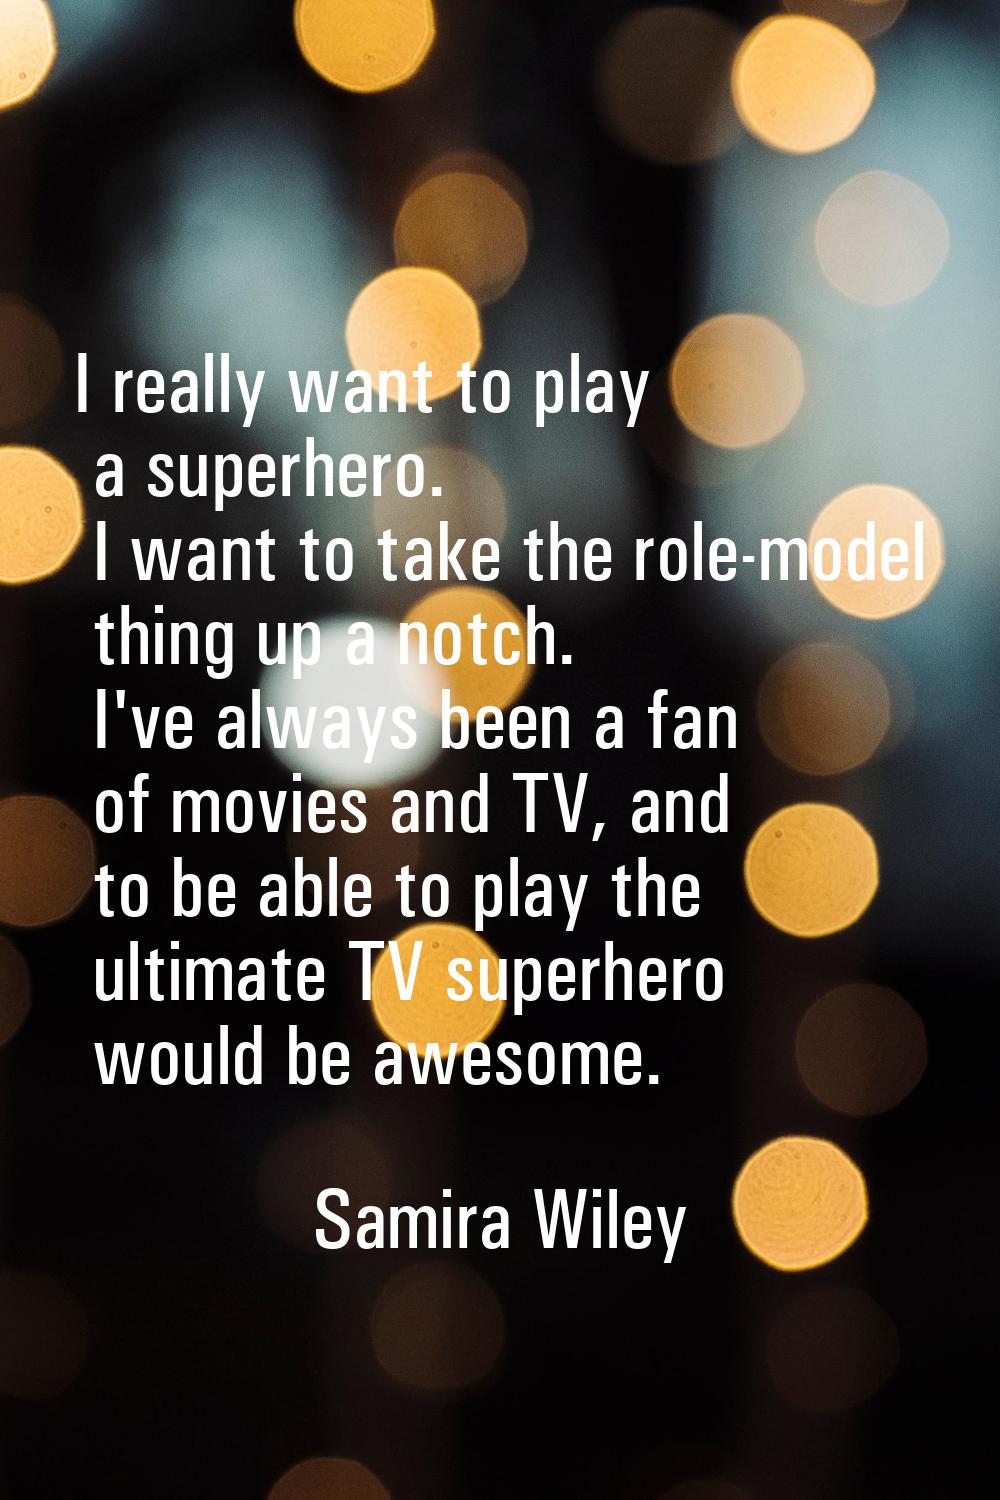 I really want to play a superhero. I want to take the role-model thing up a notch. I've always been